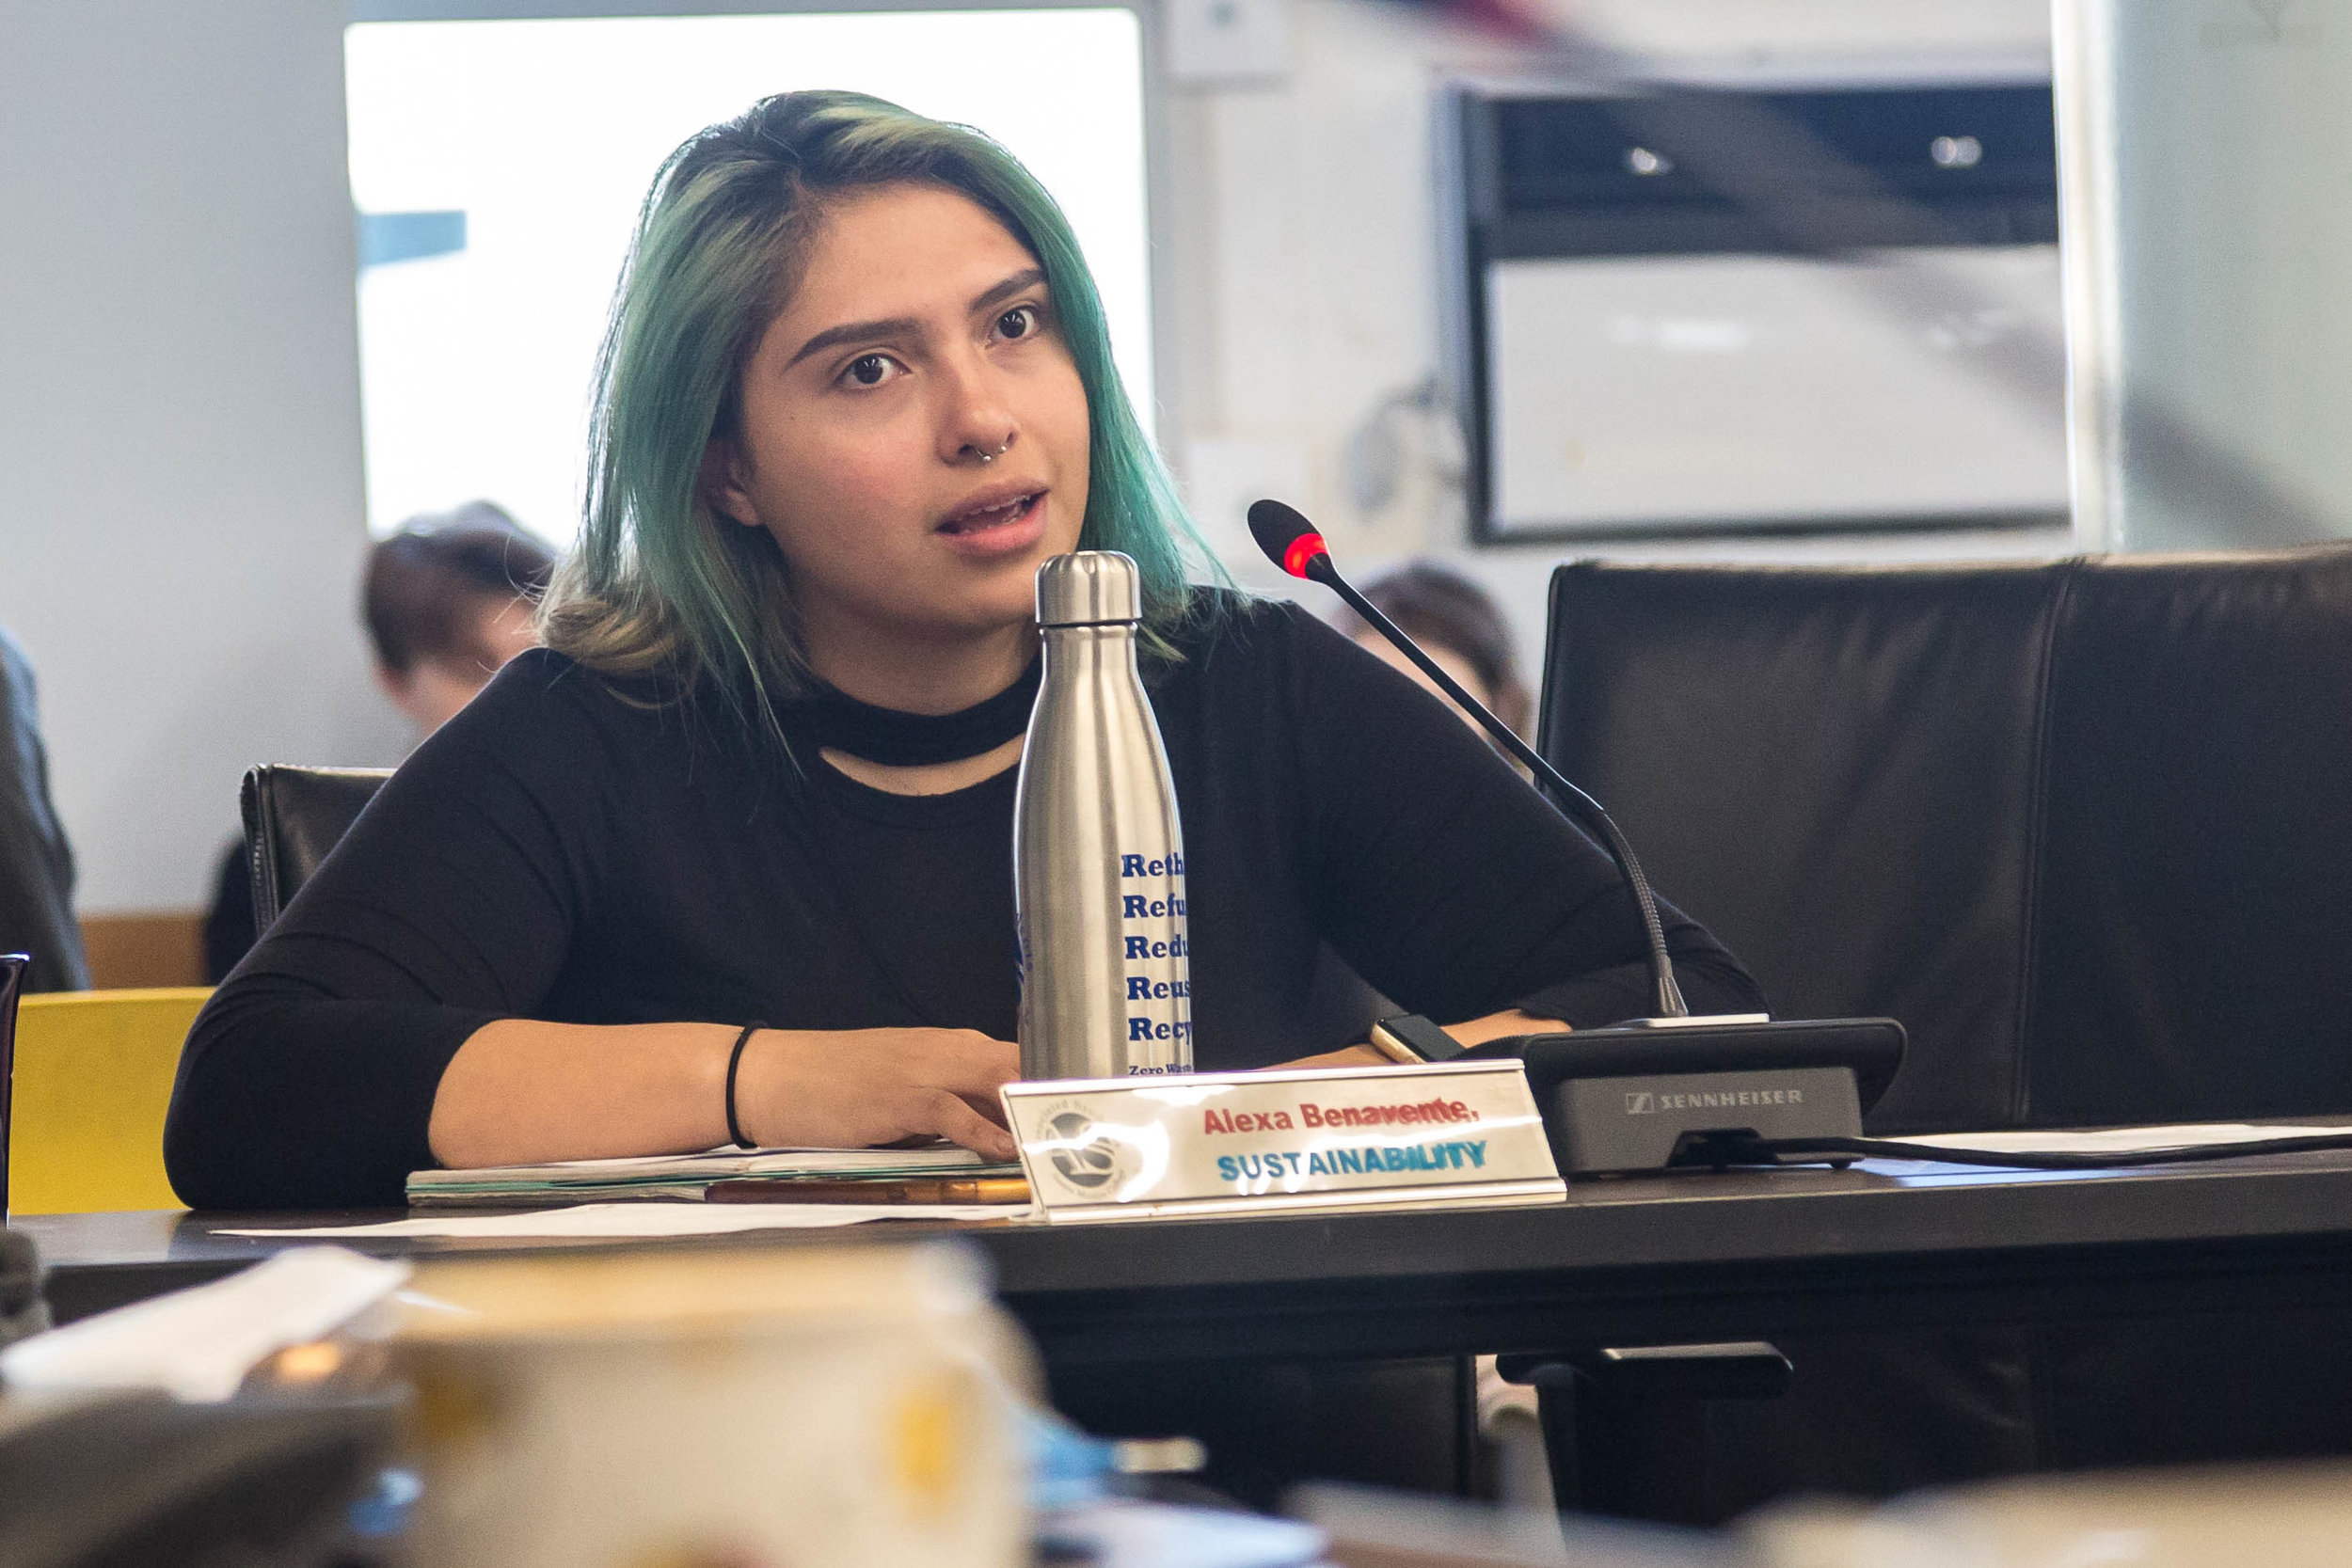  Associated Student Director of Sustainability Alexa Benavente argues whether major action item 7.3, a “Super Saturday,” would be worth the expense ($4,761.18) during the Associated Students Board of Directors meeting in the Cayton Center Lounge on t